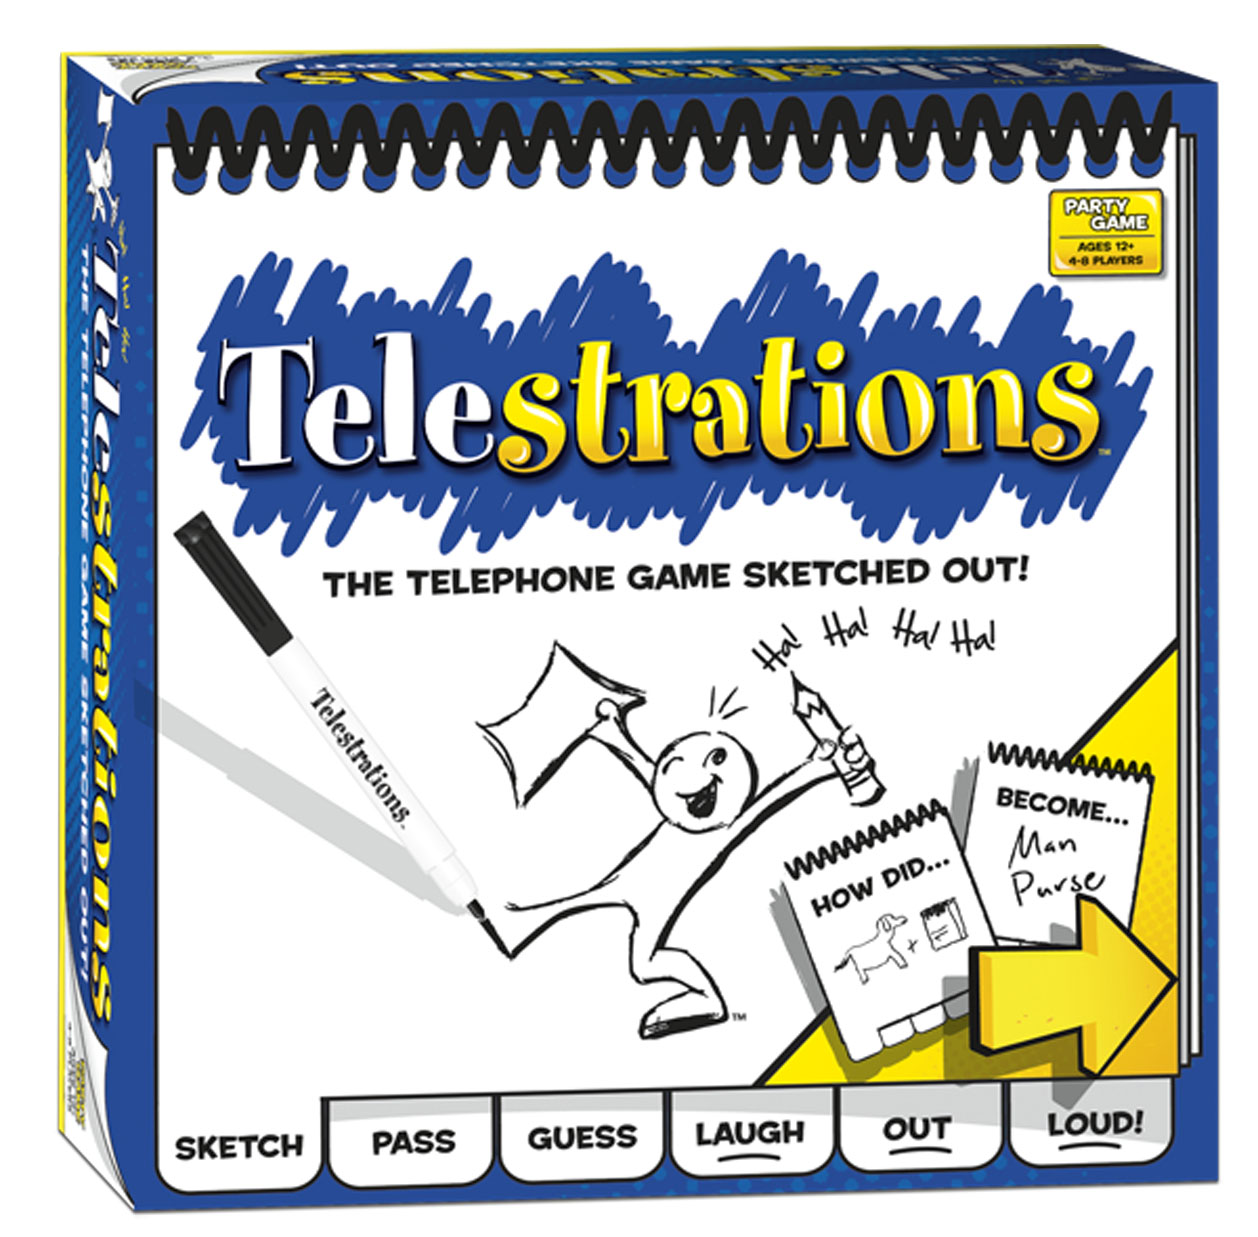 Telestrations® Named 2010 BEST PARTY GAME